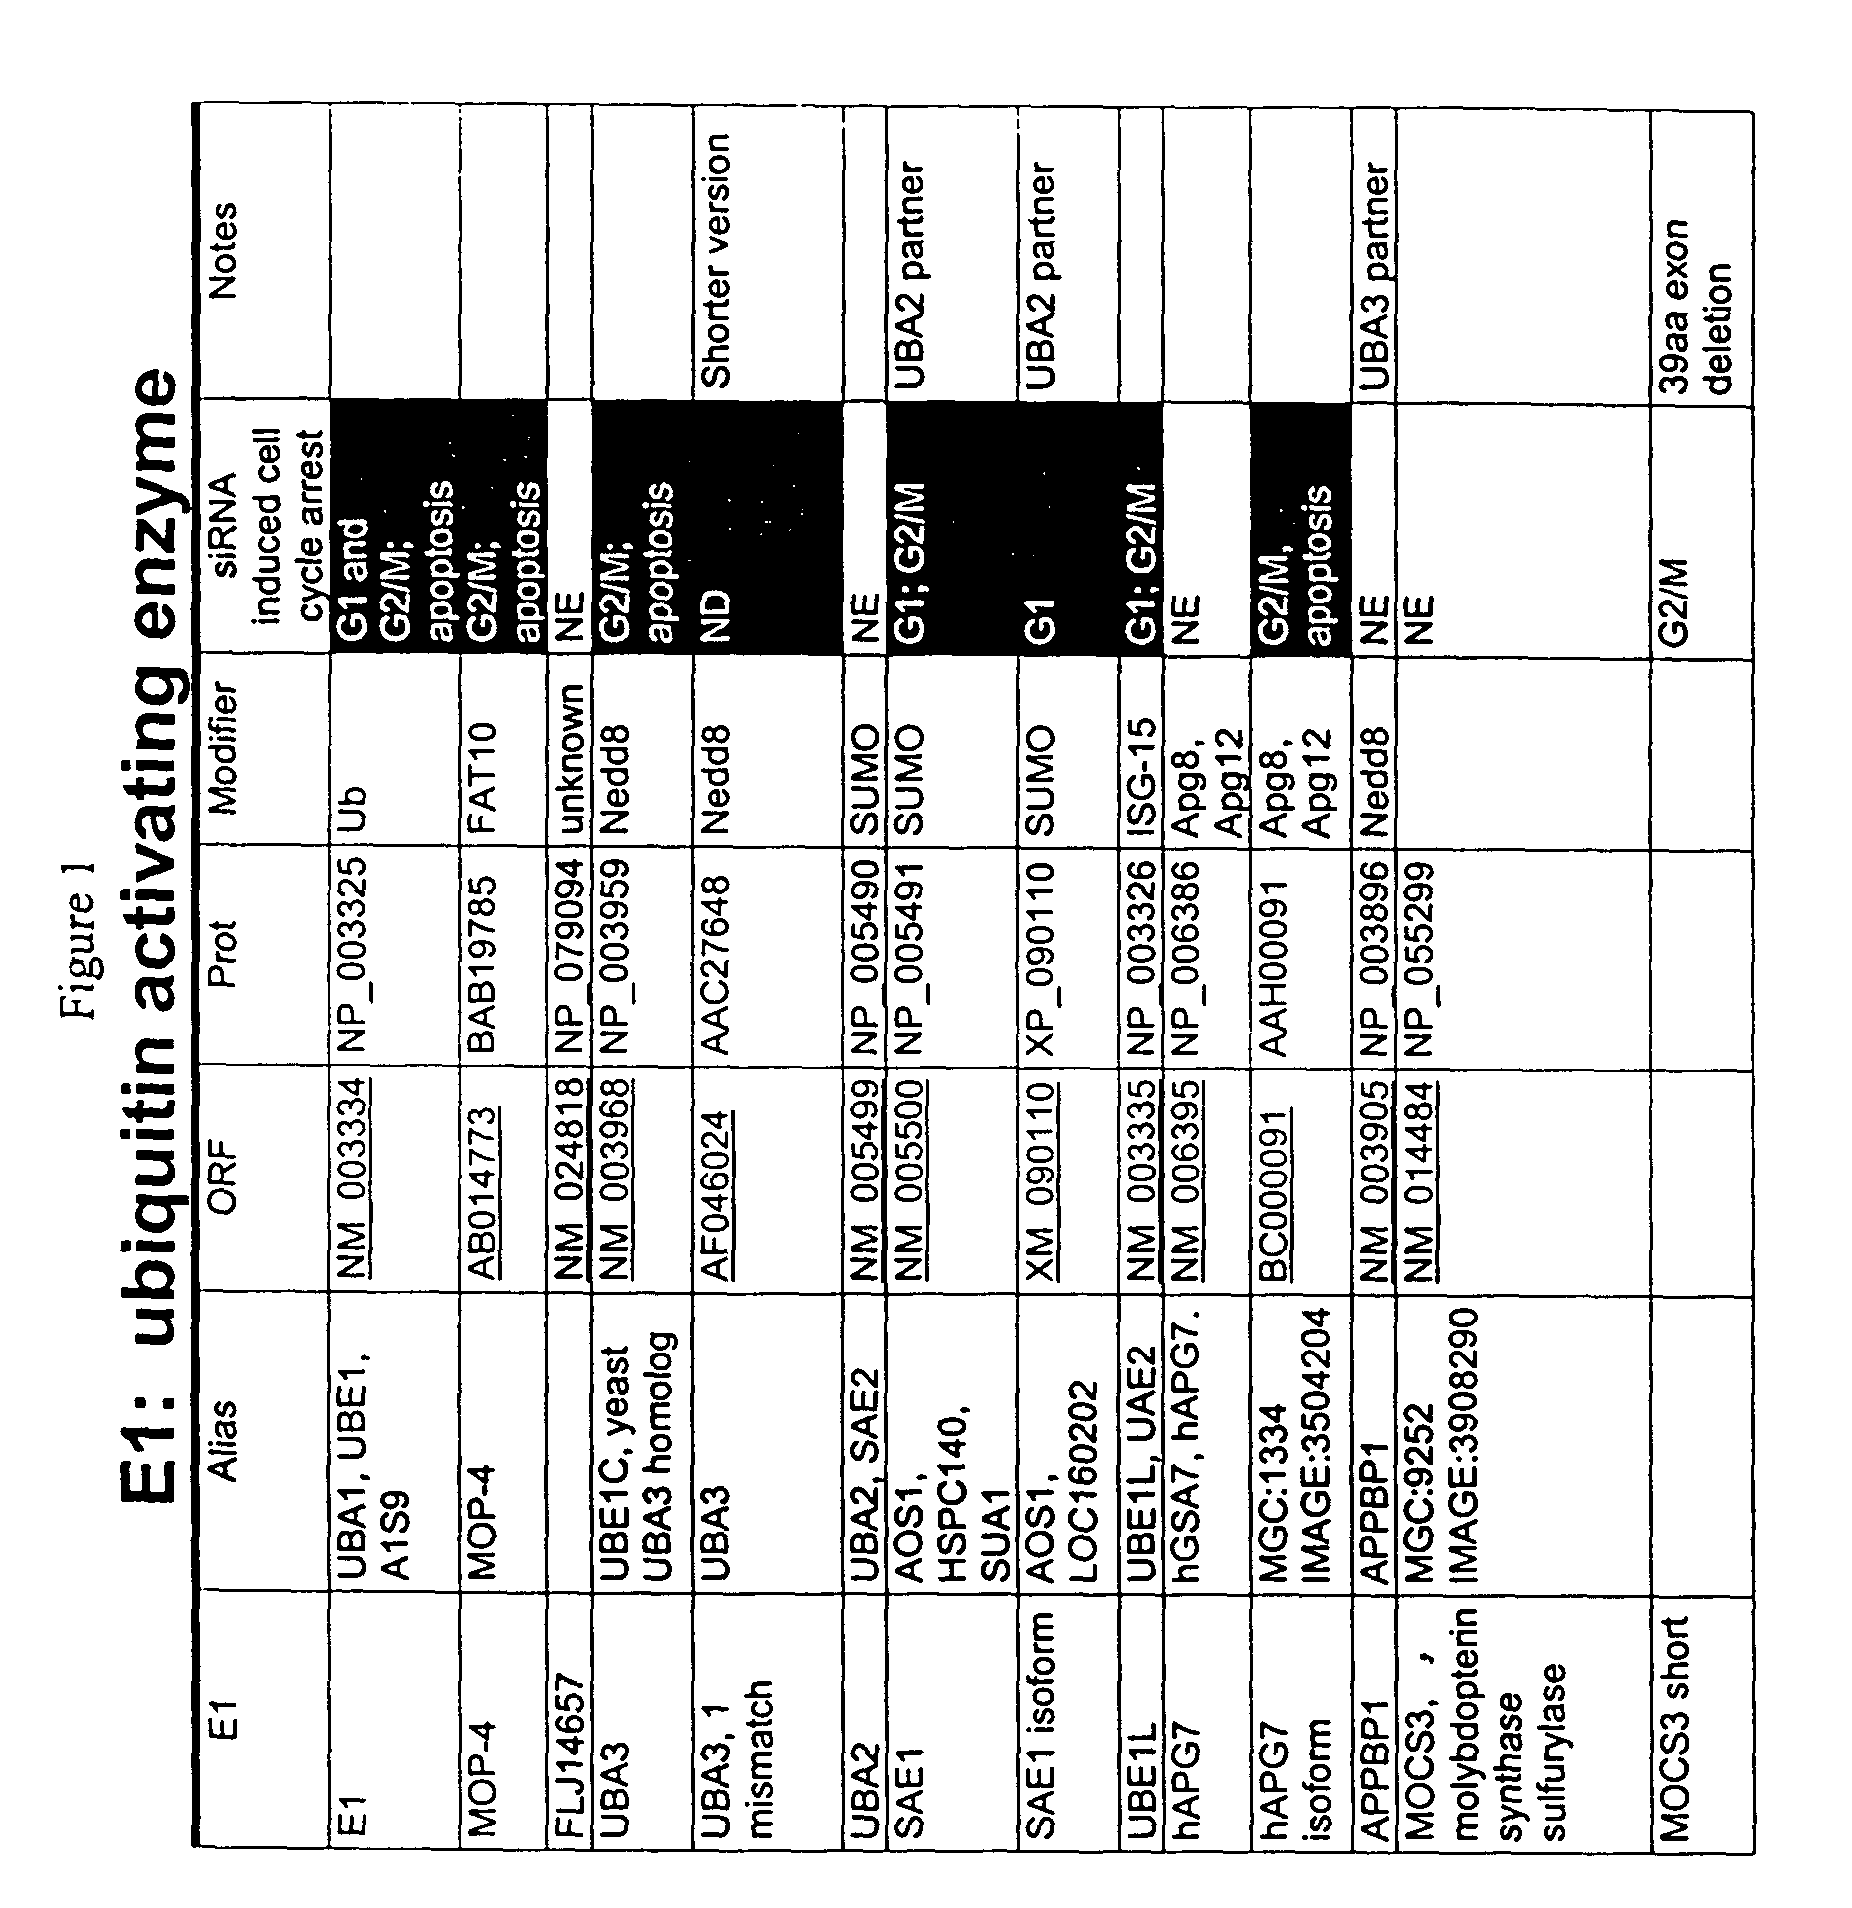 Methods of assaying for cell cycle modulators using components of the ubiquitin ligation cascade